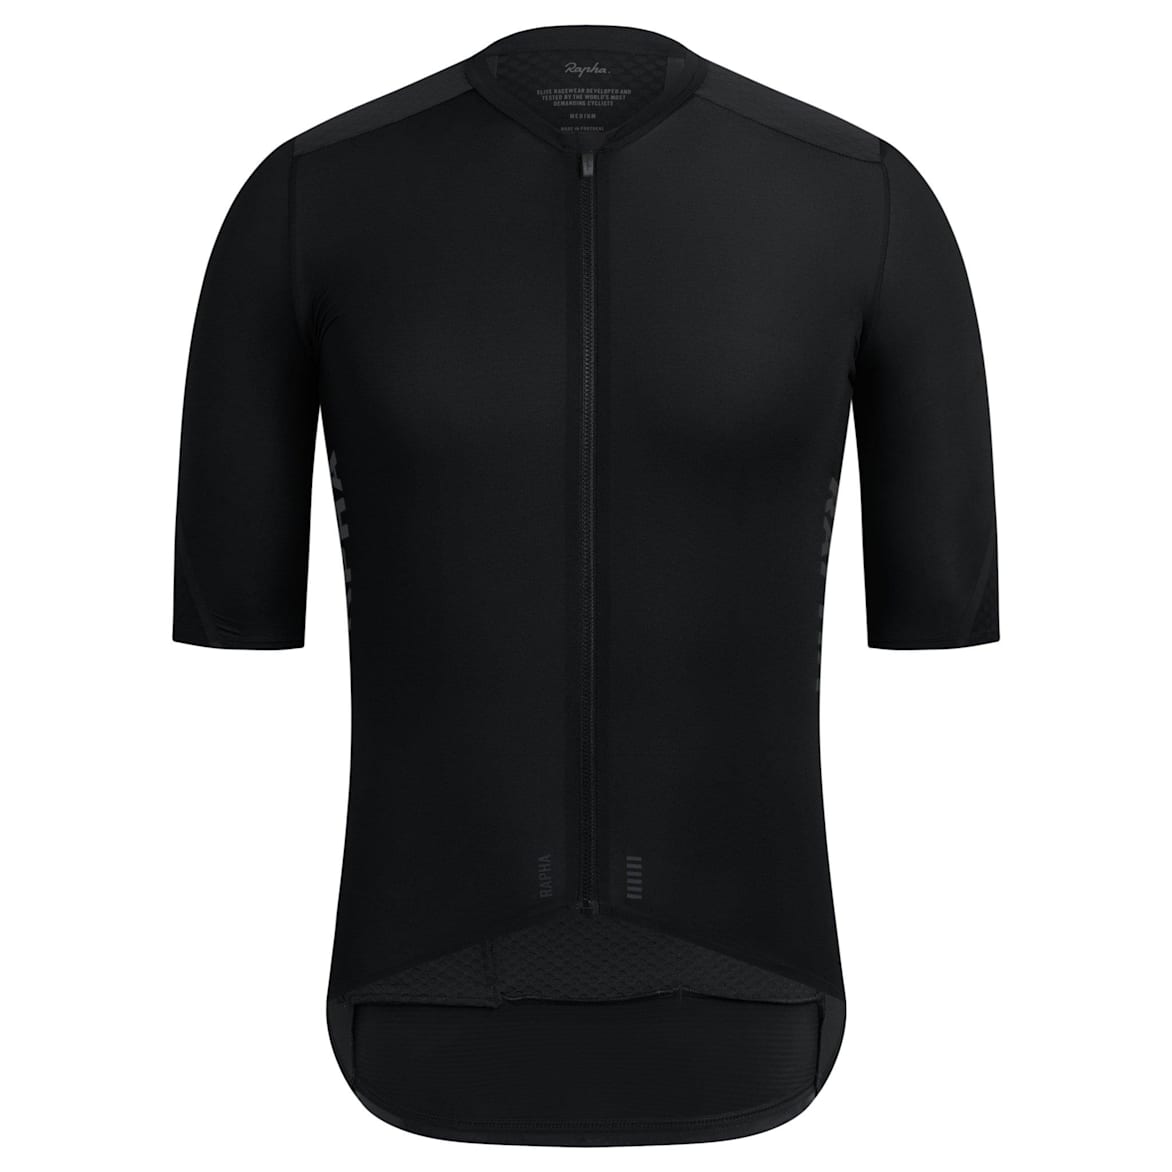 High Performance Cycling Clothing | Pro Team Collection | Rapha